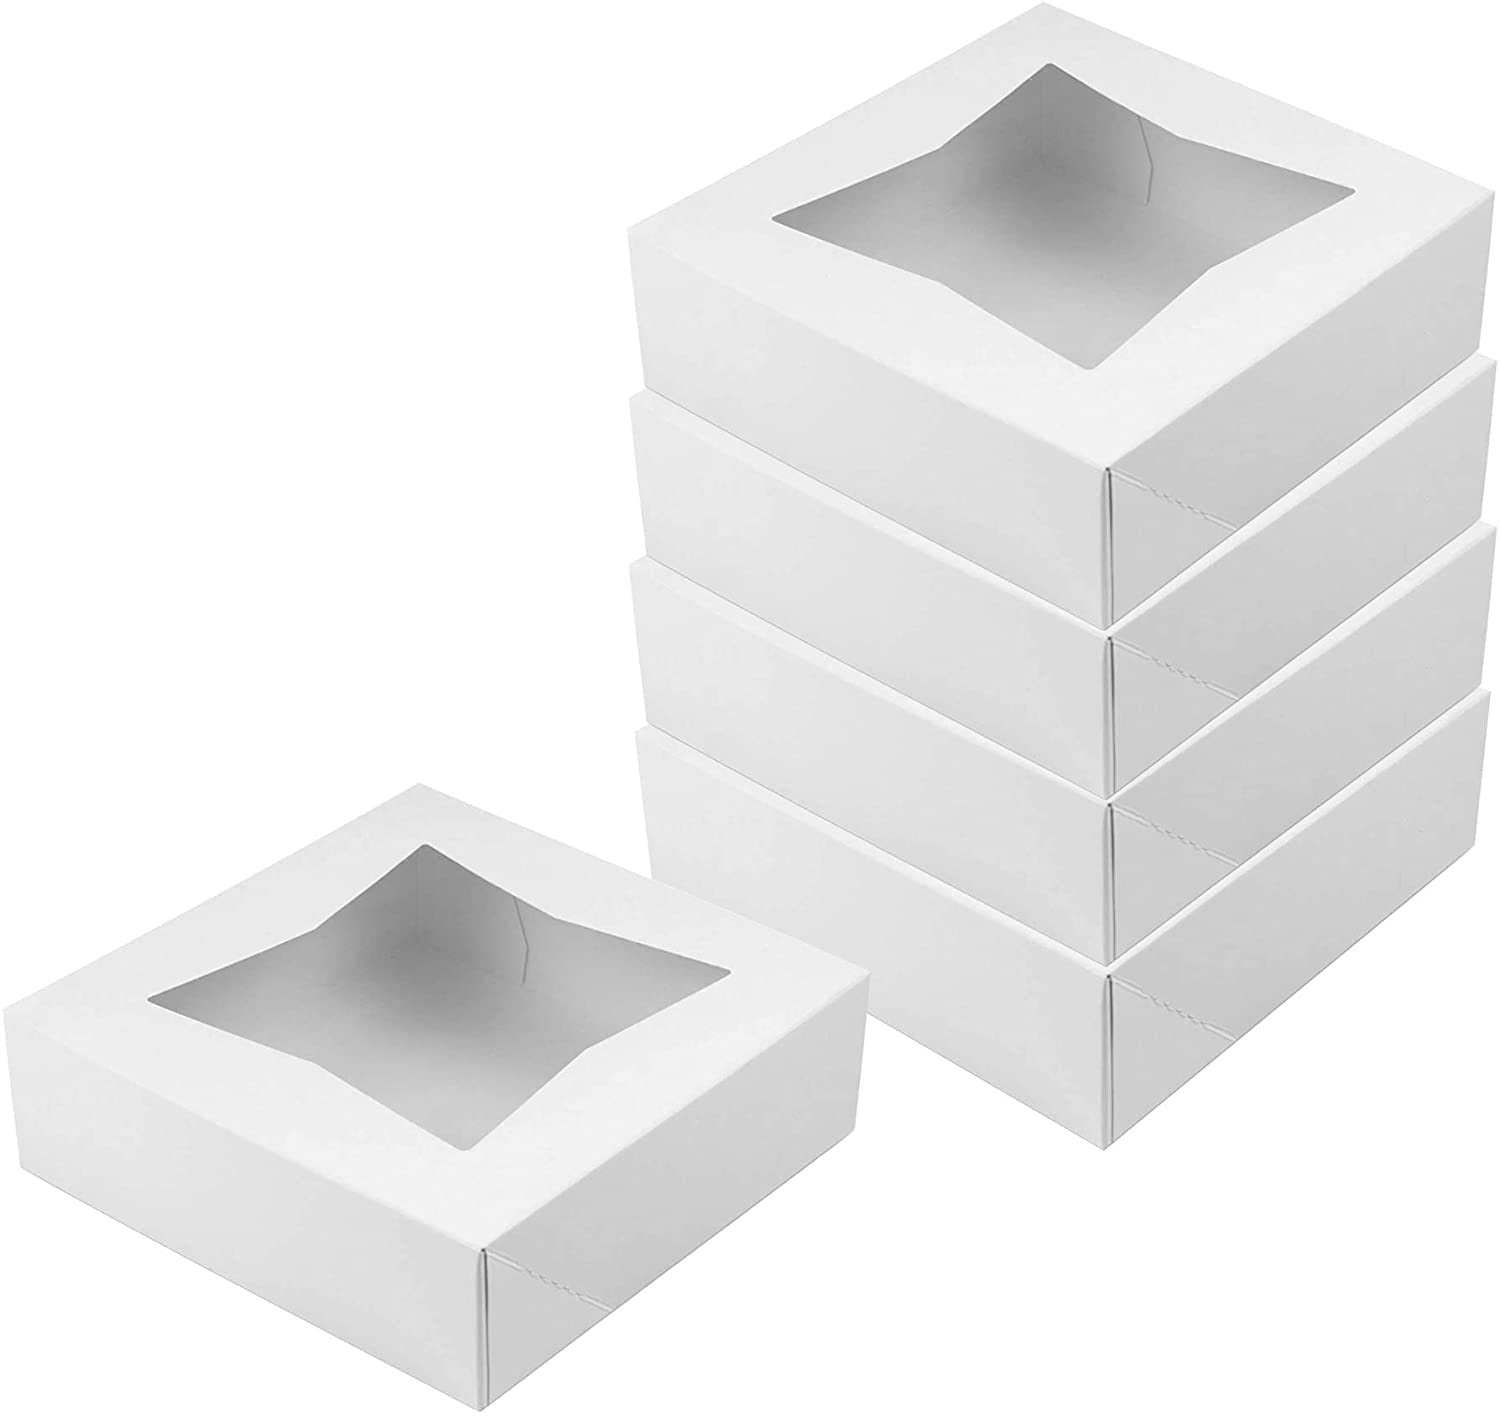 8x8x2.5” Bakery Boxes With WindowPackPastry Boxes with Window 12 White